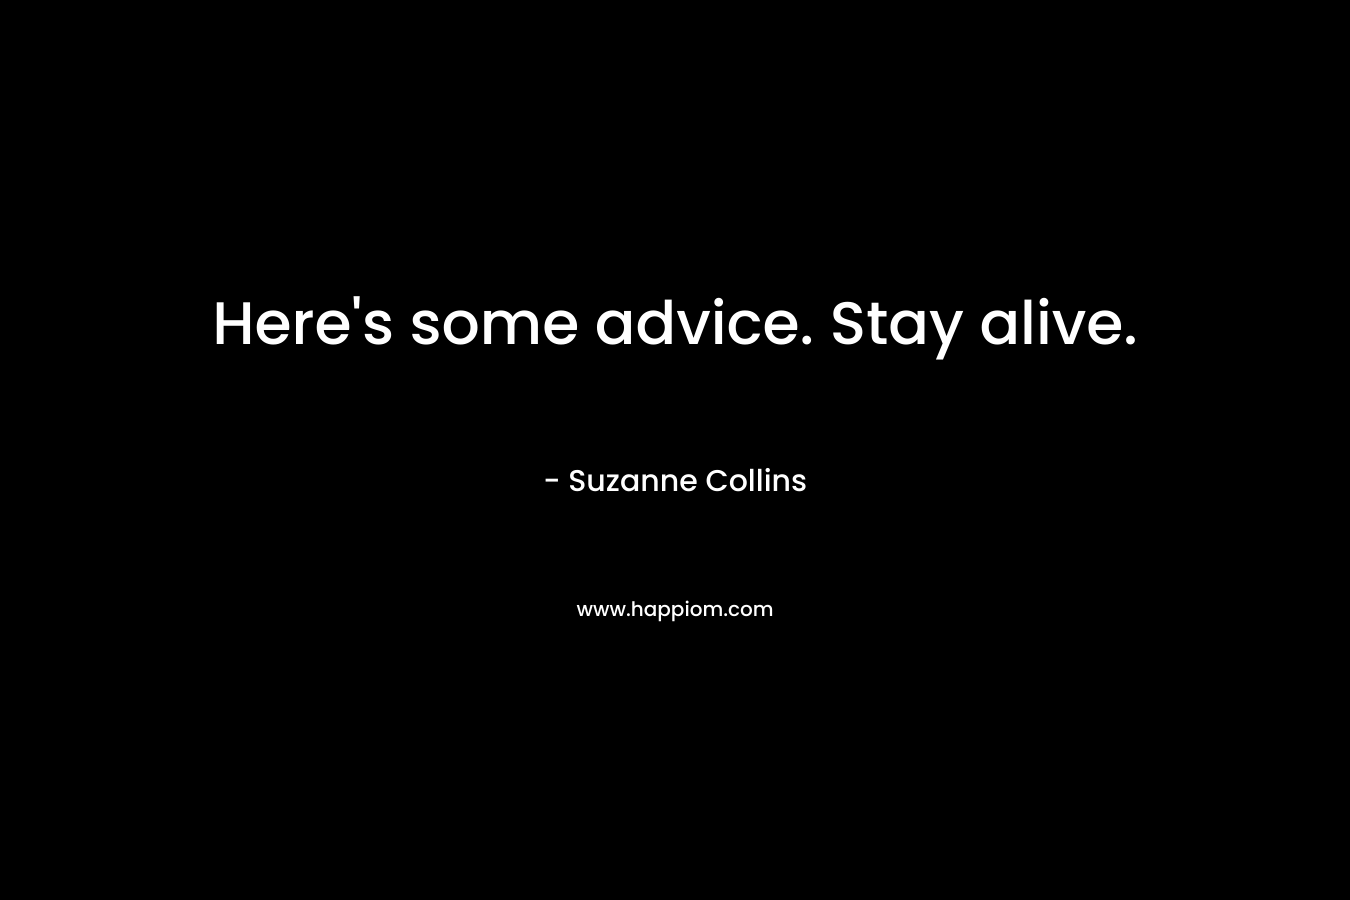 Here's some advice. Stay alive.